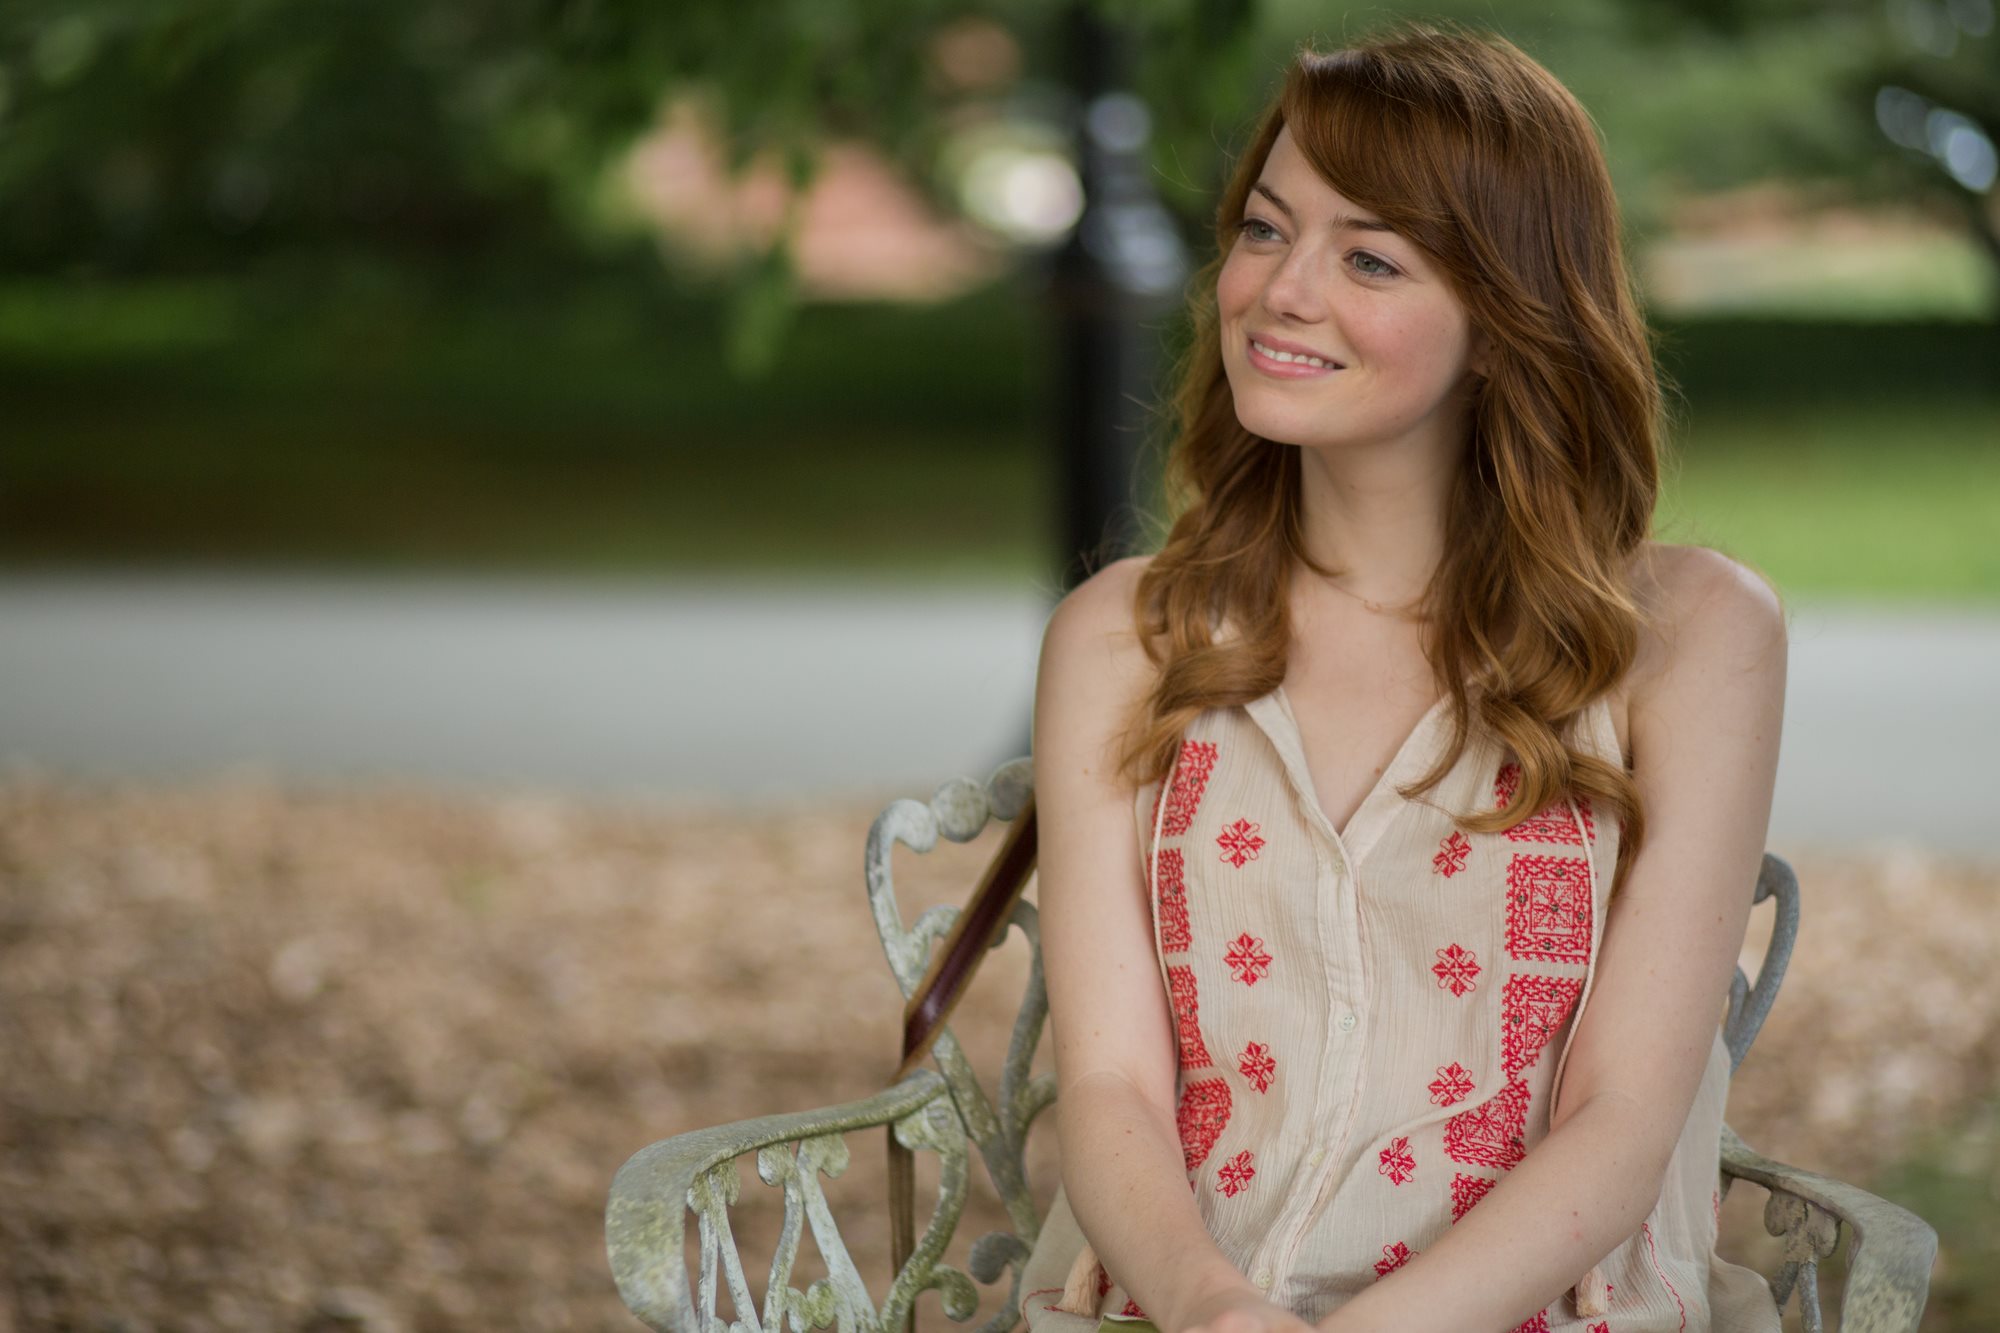 Movie Irrational Man HD Wallpaper | Background Image